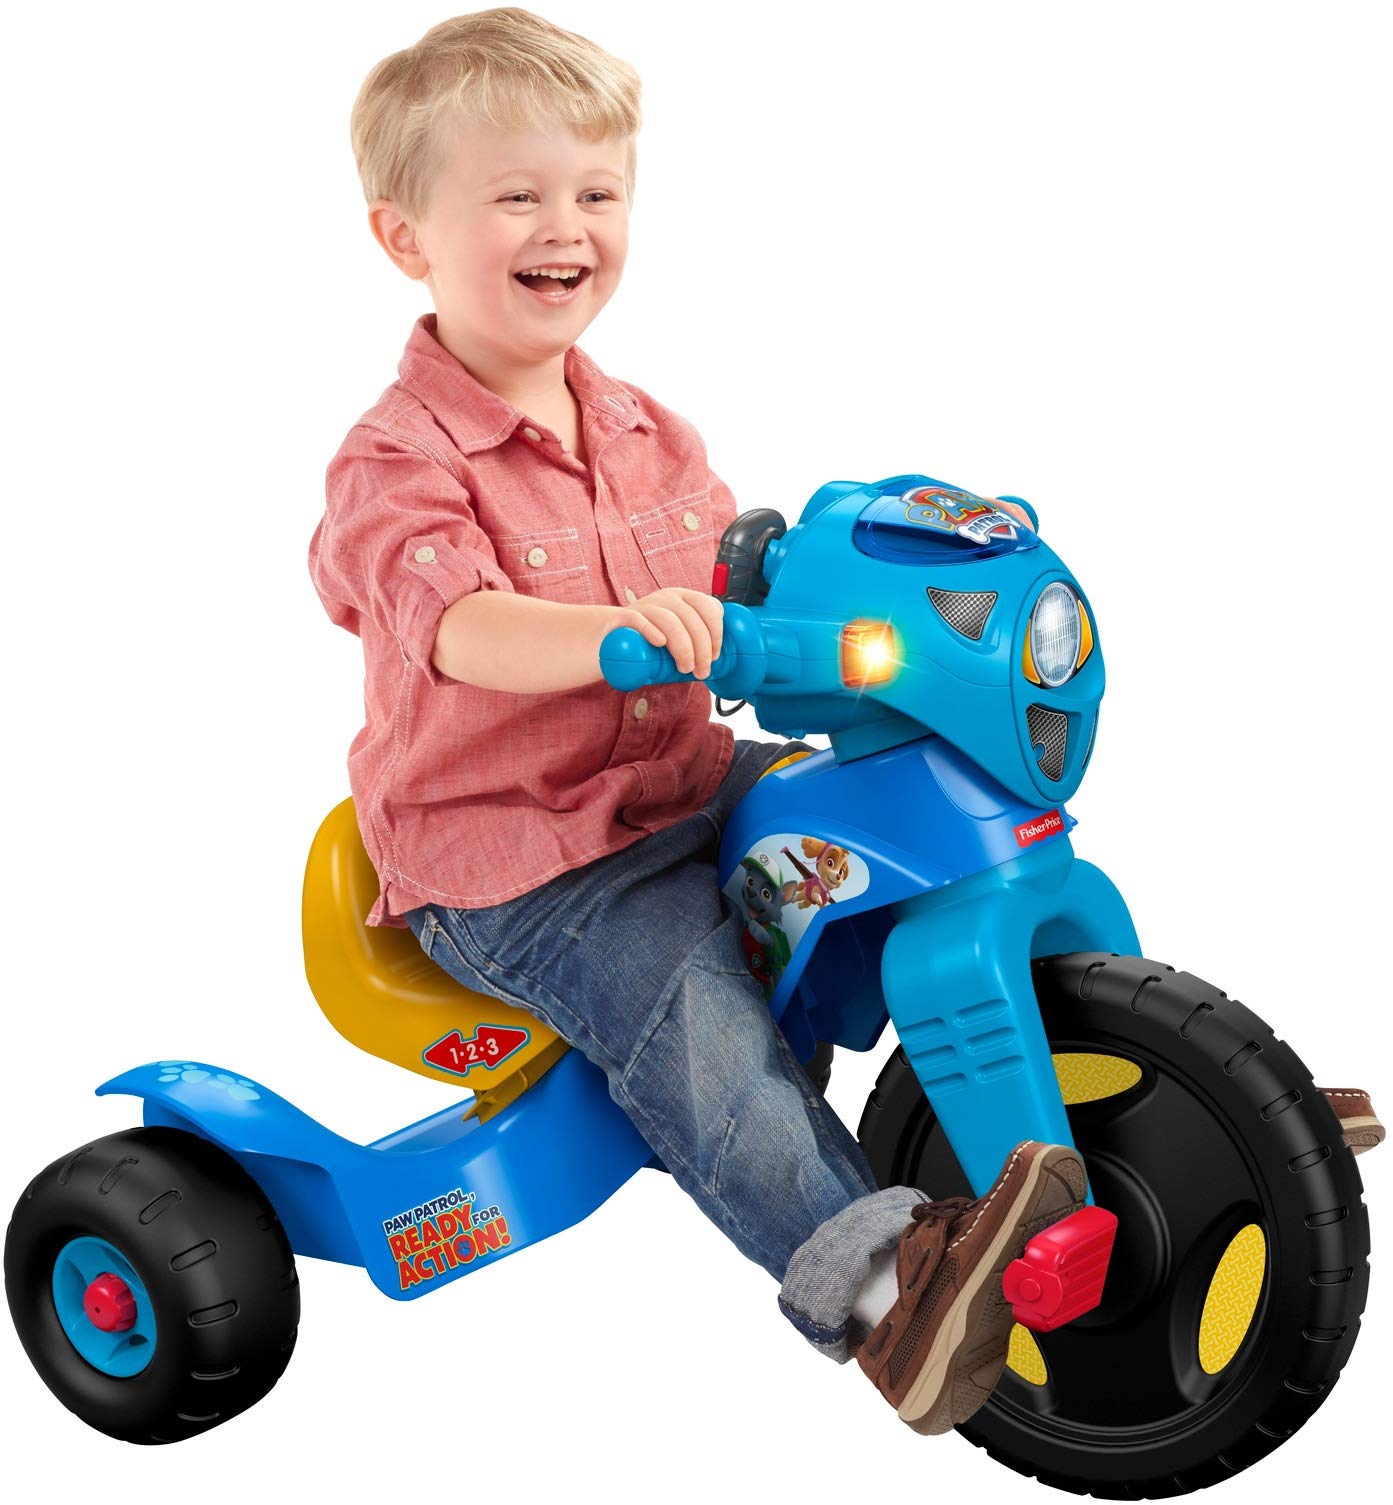 Fisher-Price Nickelodeon PAW Patrol Lights & Sounds Trike Multi Color, 1 - 6 years